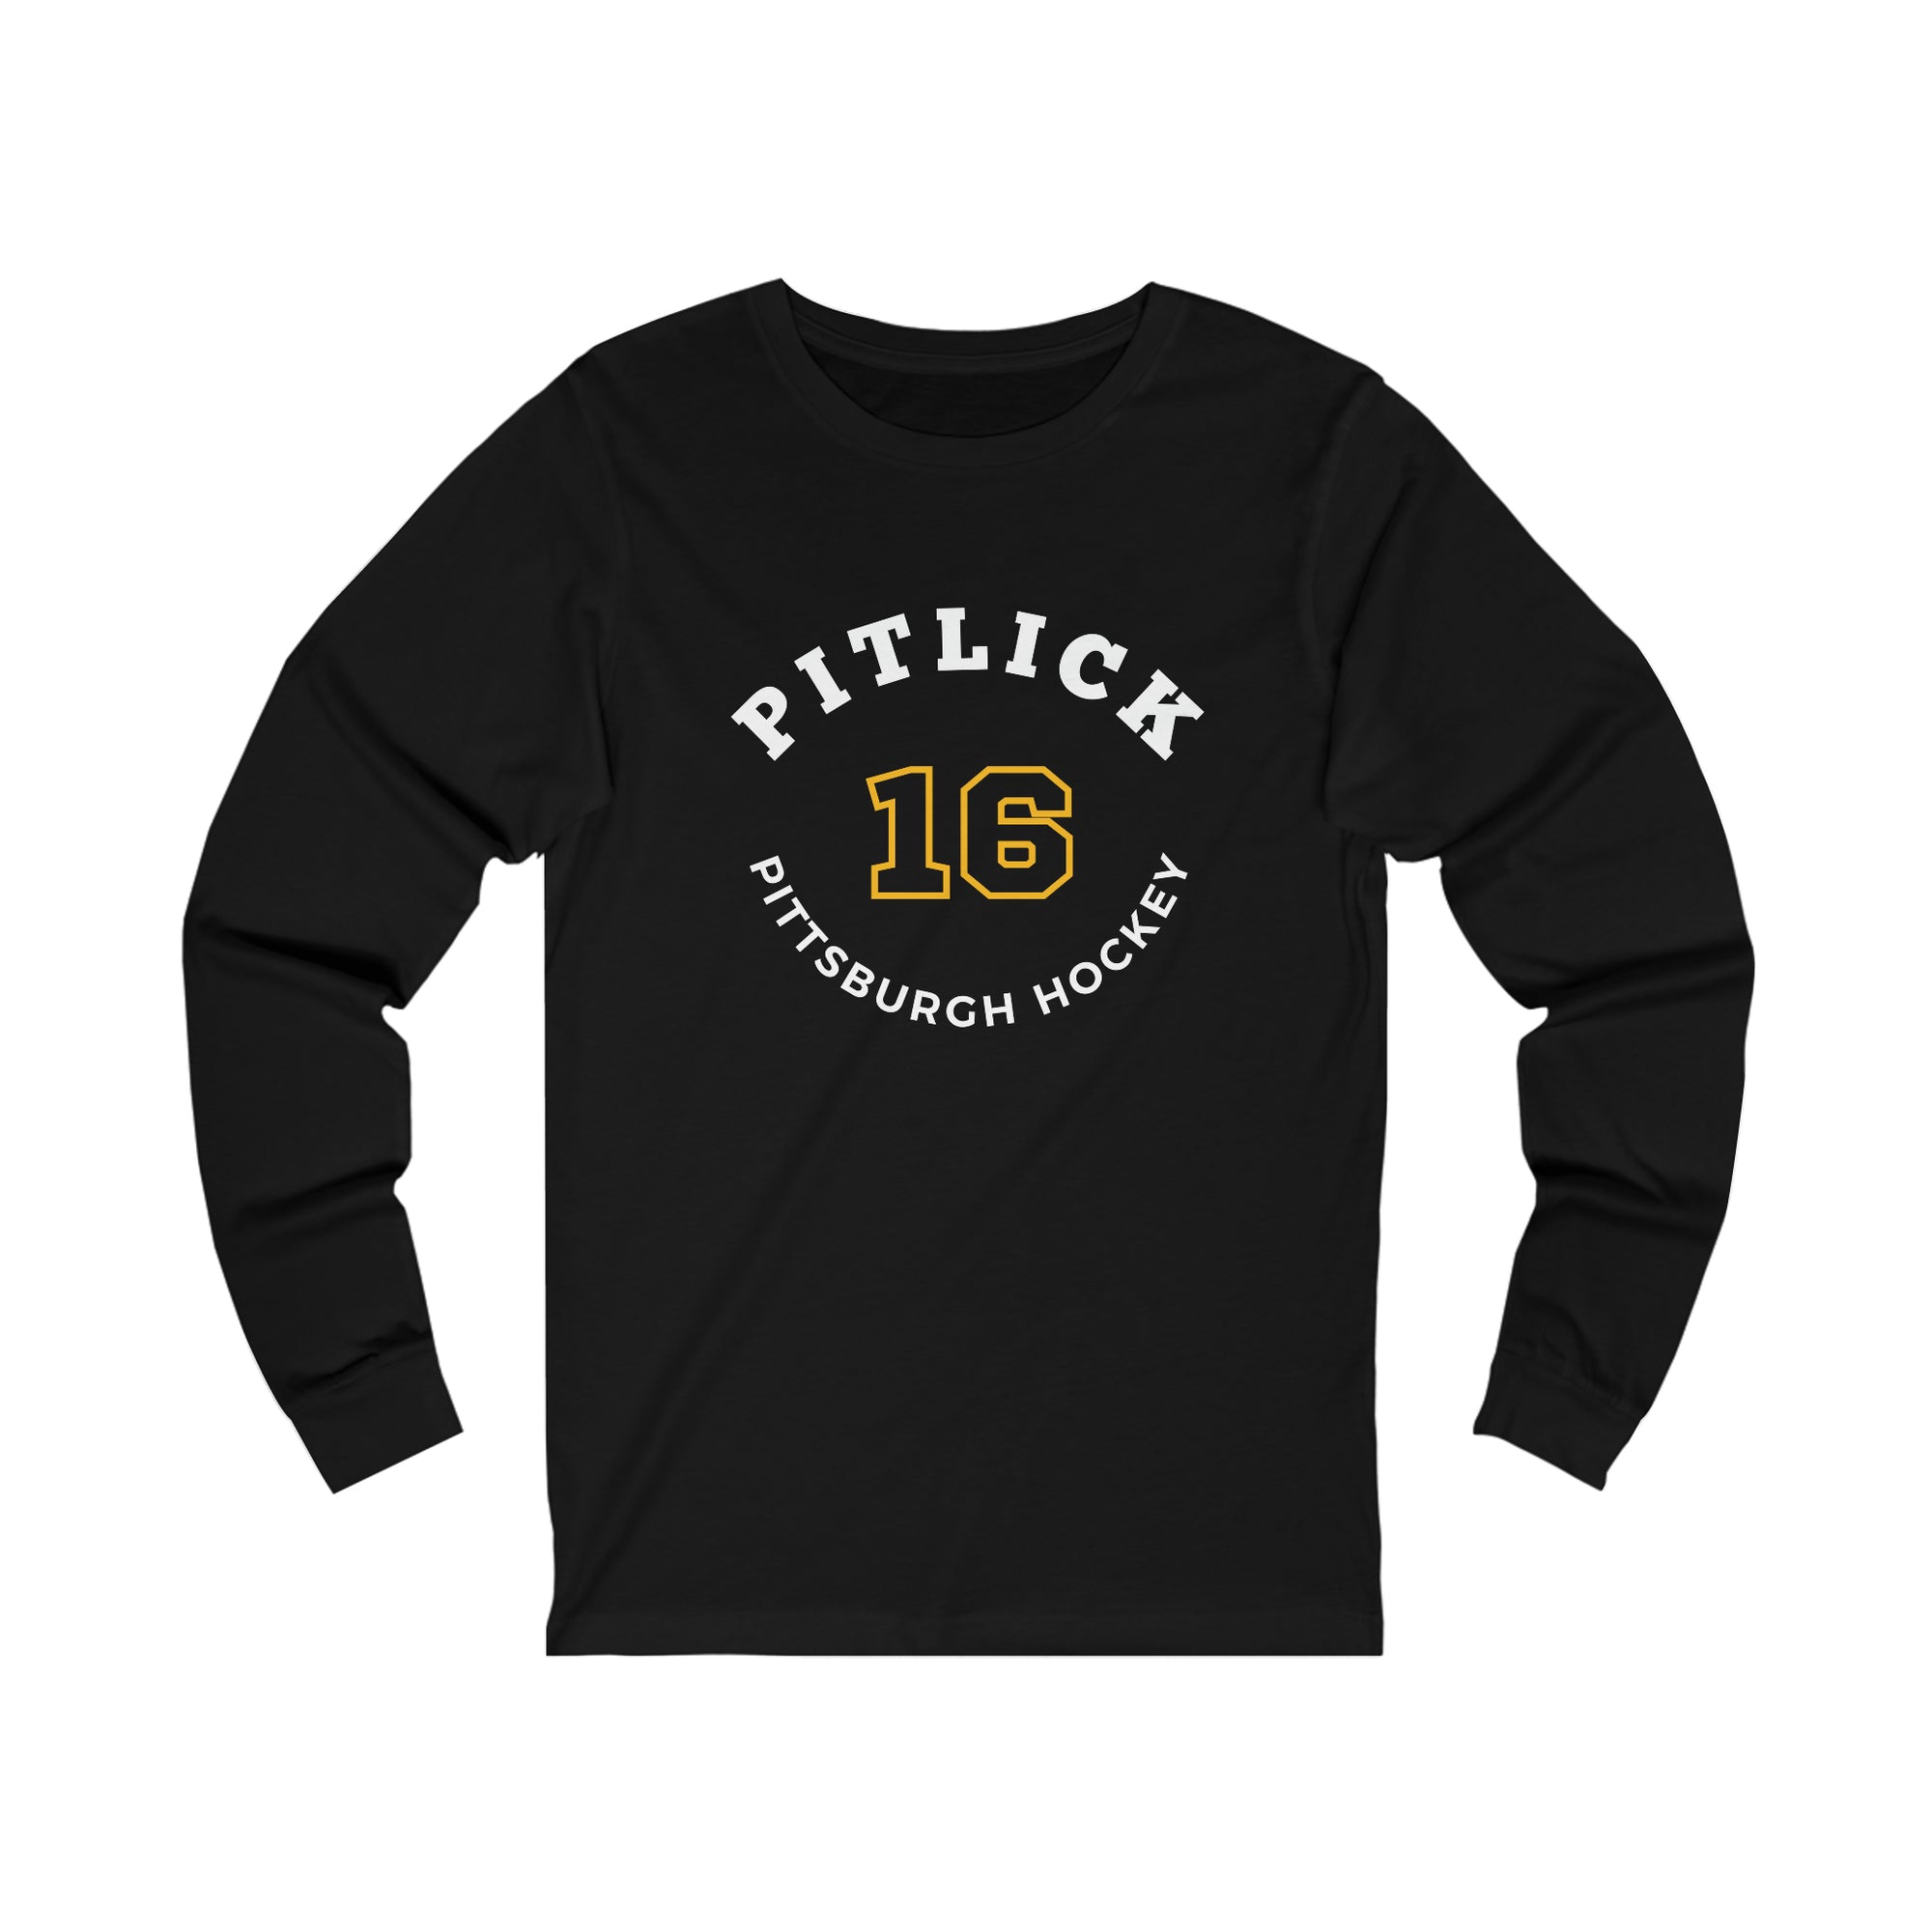 Pitlick 16 Pittsburgh Hockey Number Arch Design Unisex Jersey Long Sleeve Shirt